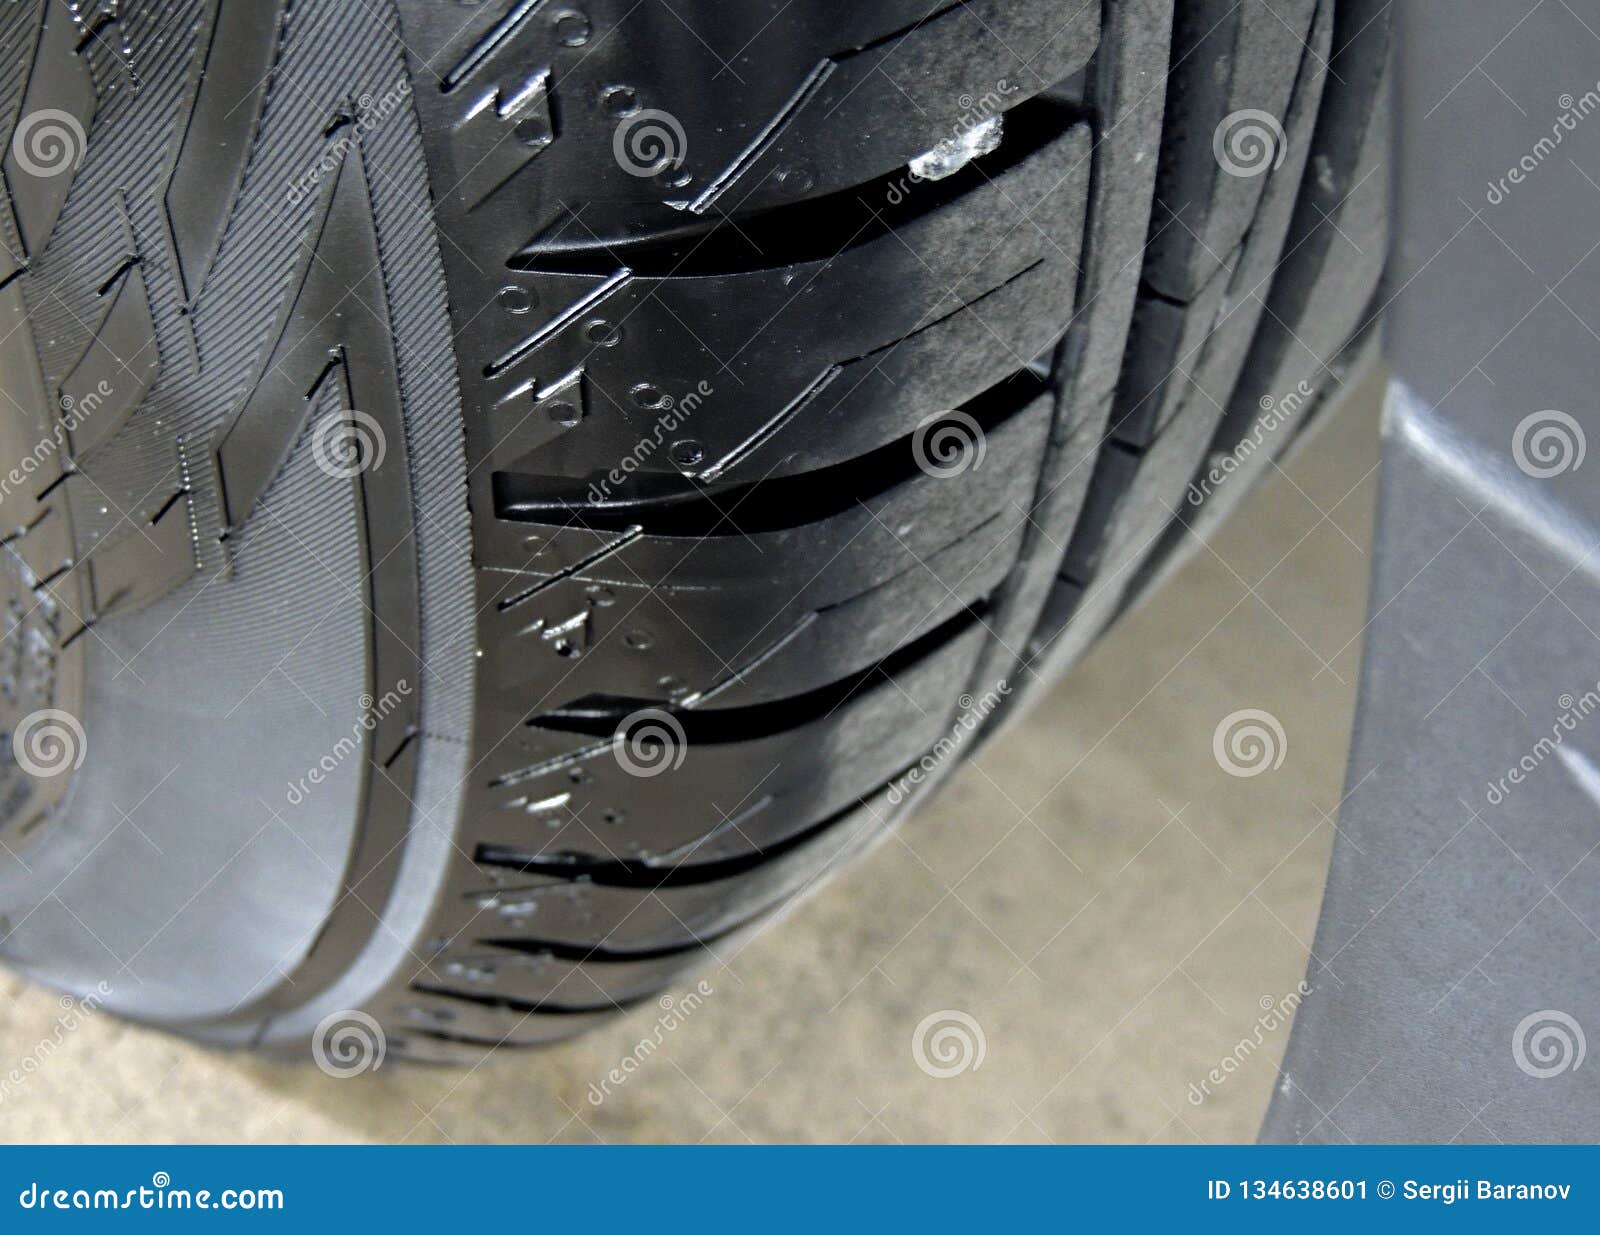 polished sidewall of car tire on the alloy wheel rim close up